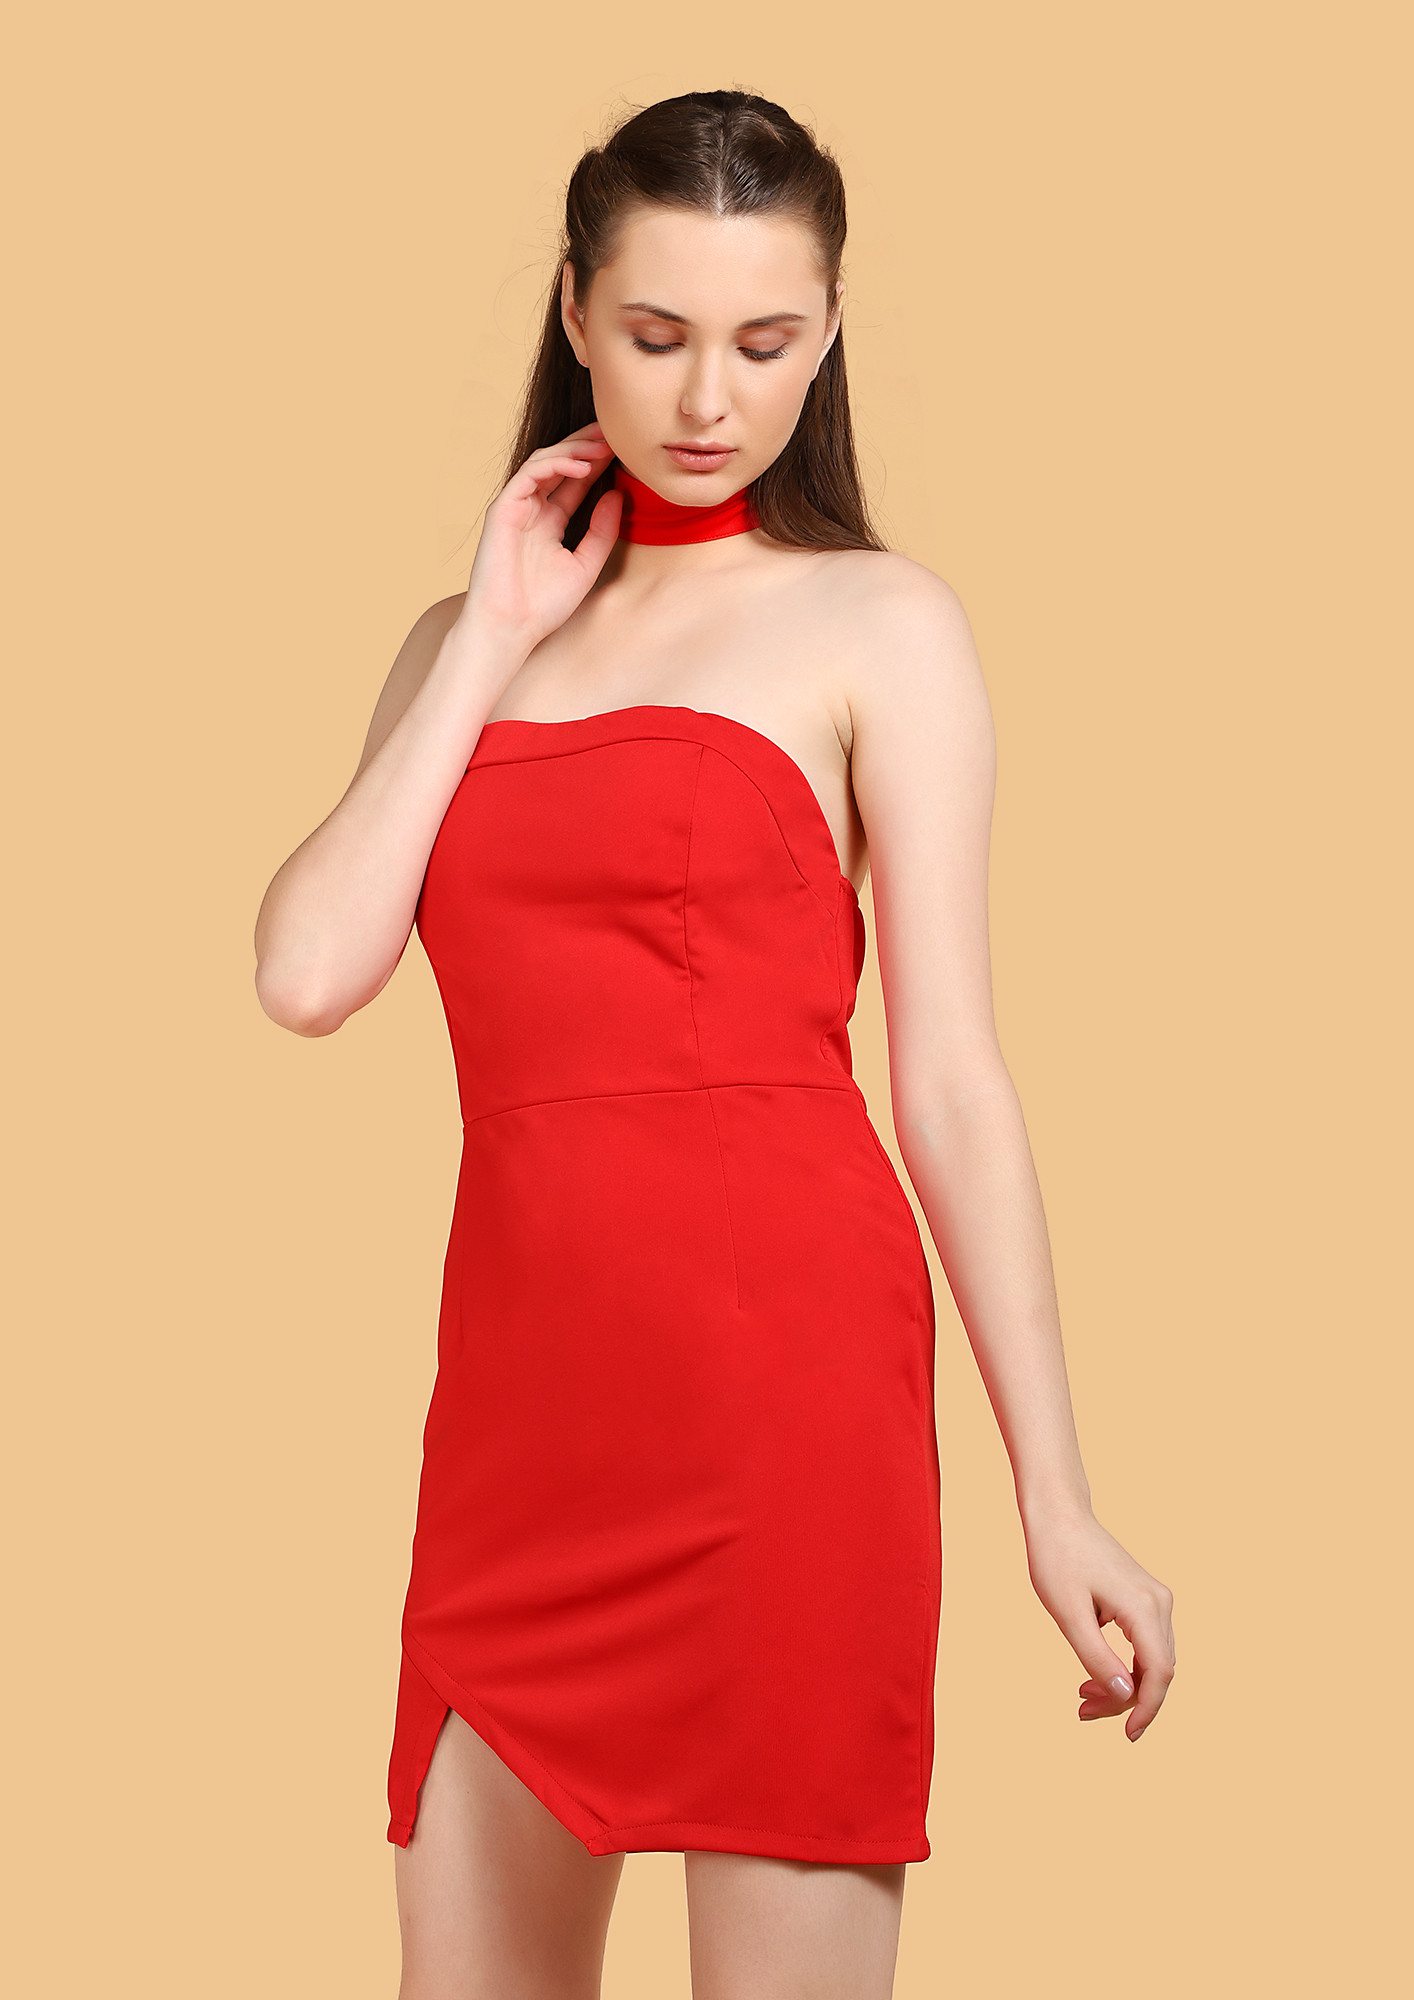 My Lady In Red Bodycon Dress